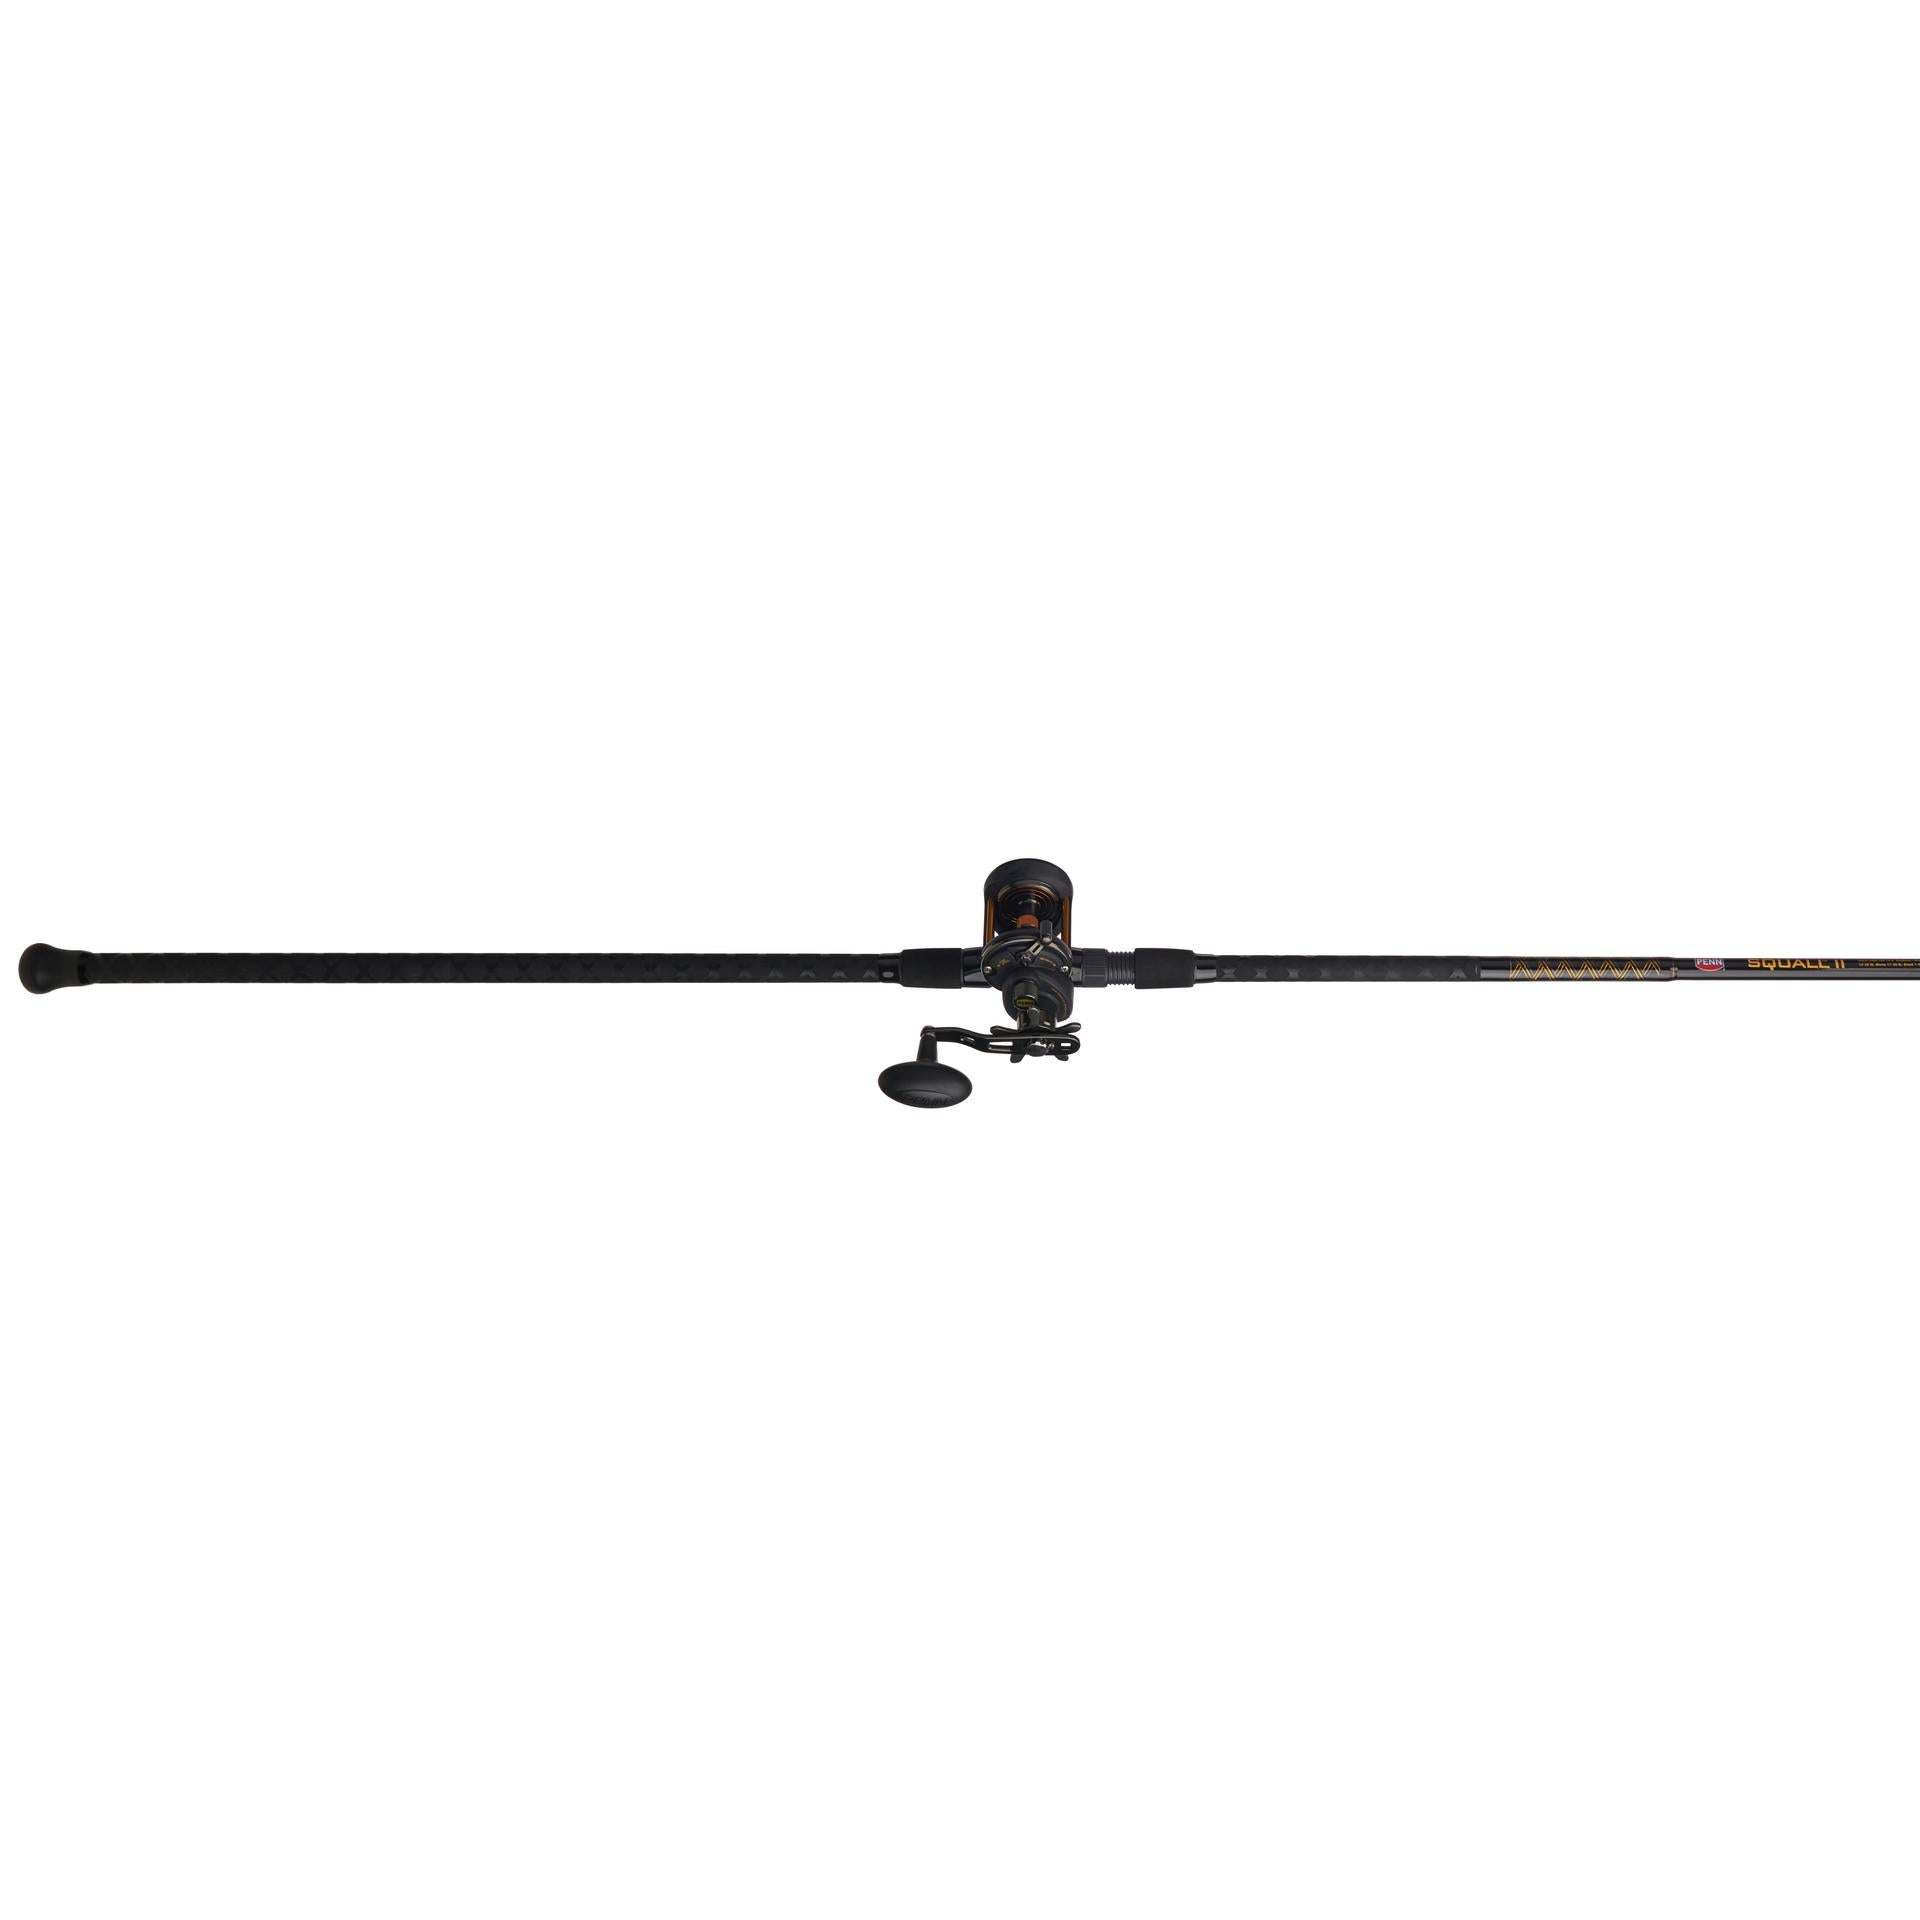 Penn squall lp matched with a falcon hd rod : r/Fishing_Gear